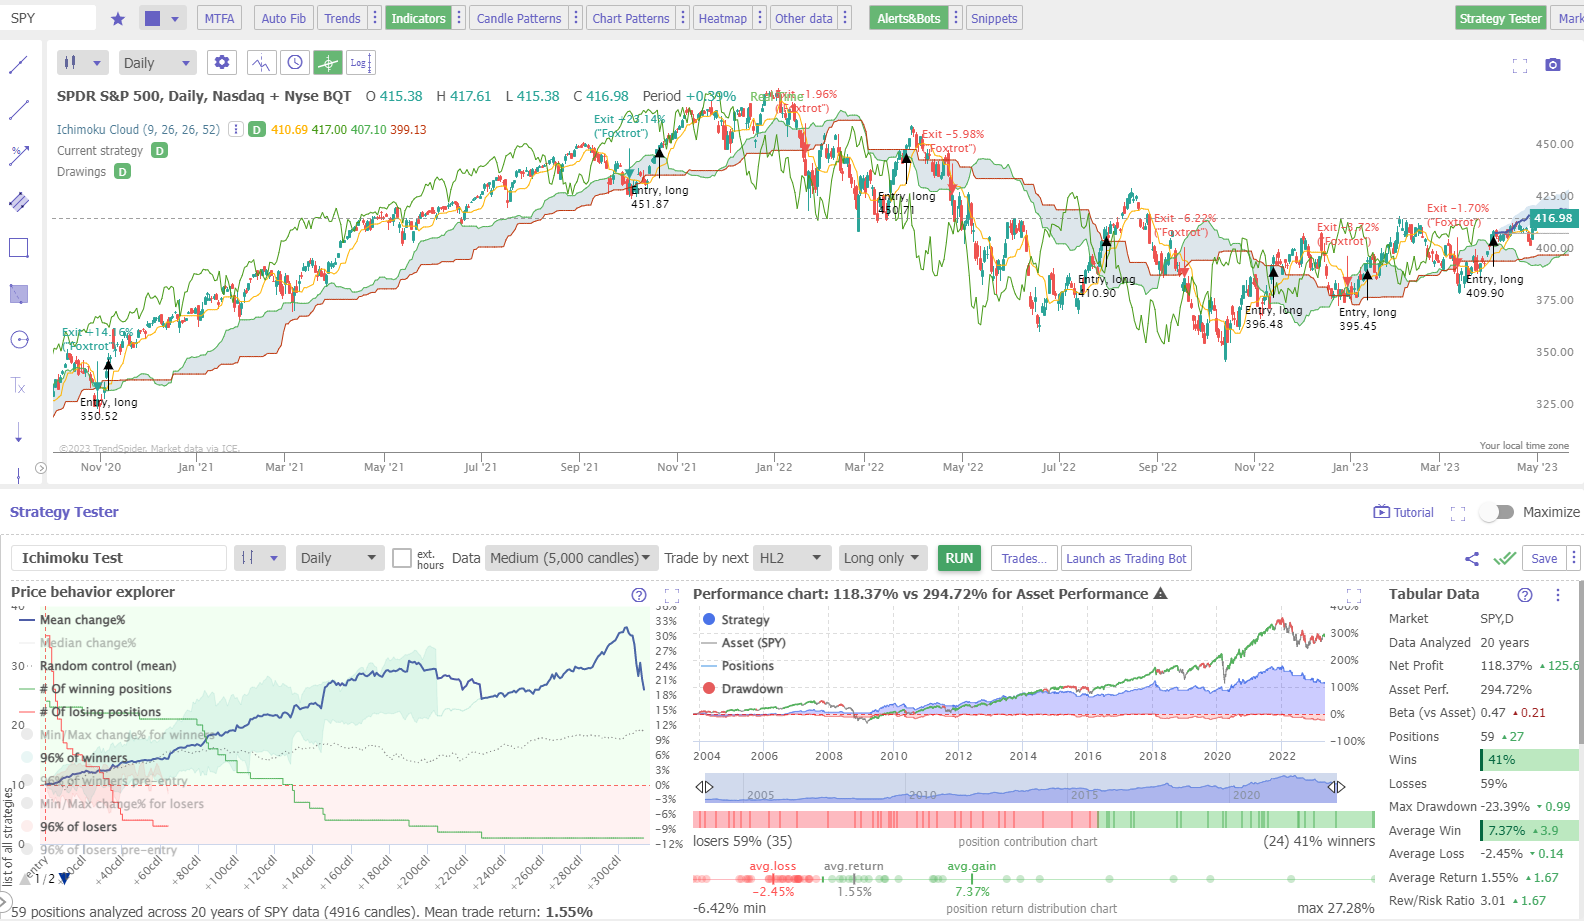 Test Results from the Ichimoku Cloud Indicator vs. the S&P500